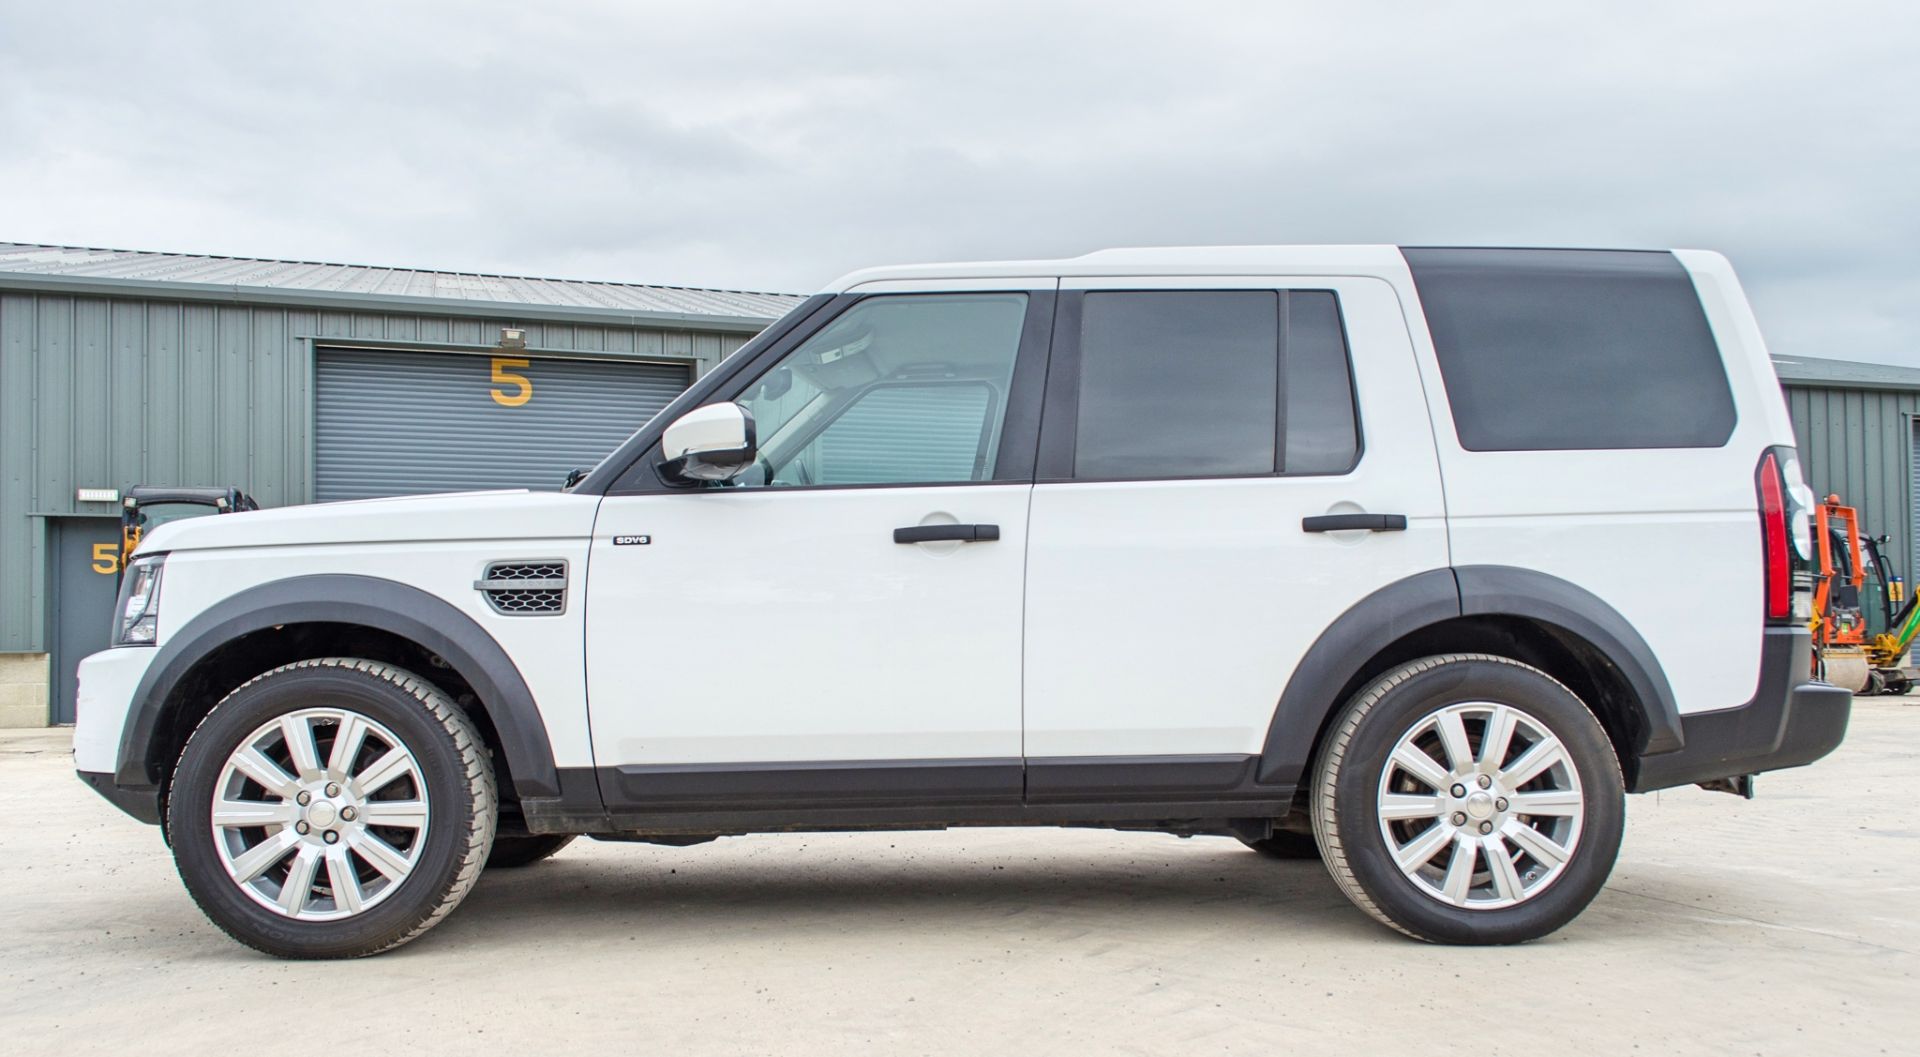 Land Rover Discovery 4 3.0 SDV6 255 XS Commercial 4x4 utility vehicle Registration Number: RV14 - Image 7 of 33